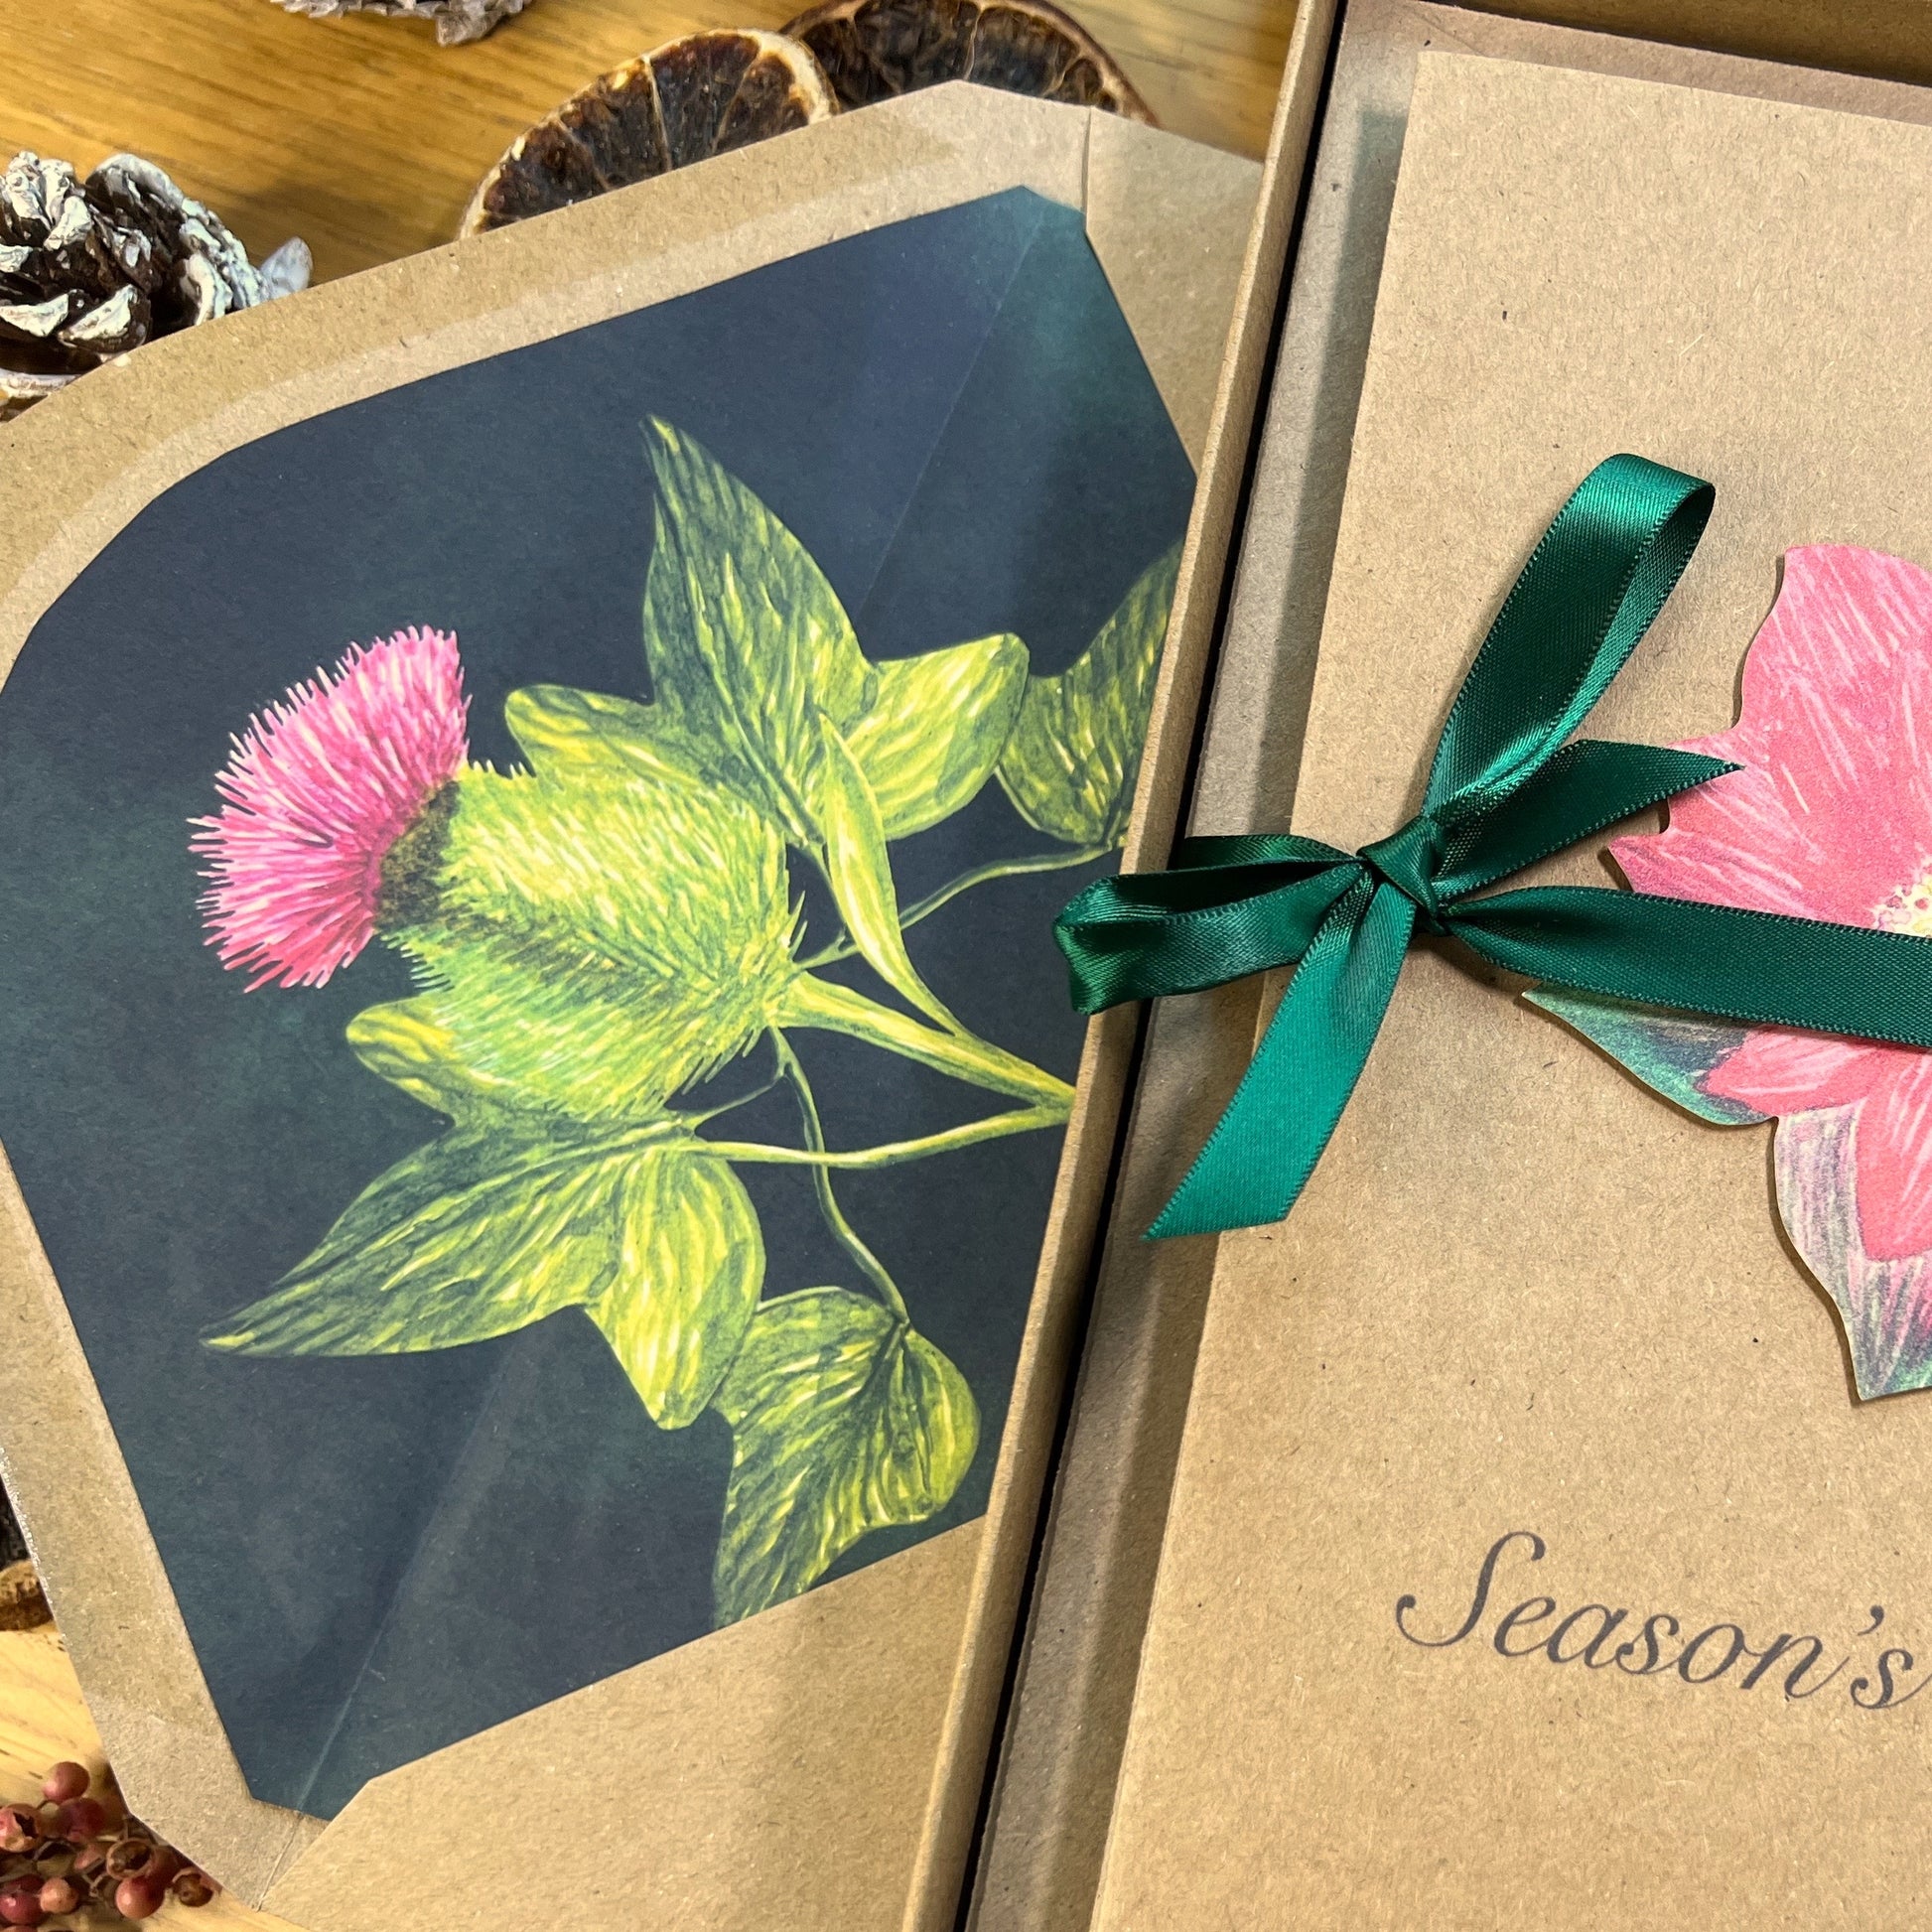 Thistle and ivy illustrated inlay on a Manila envelope next to a box of greetings cards